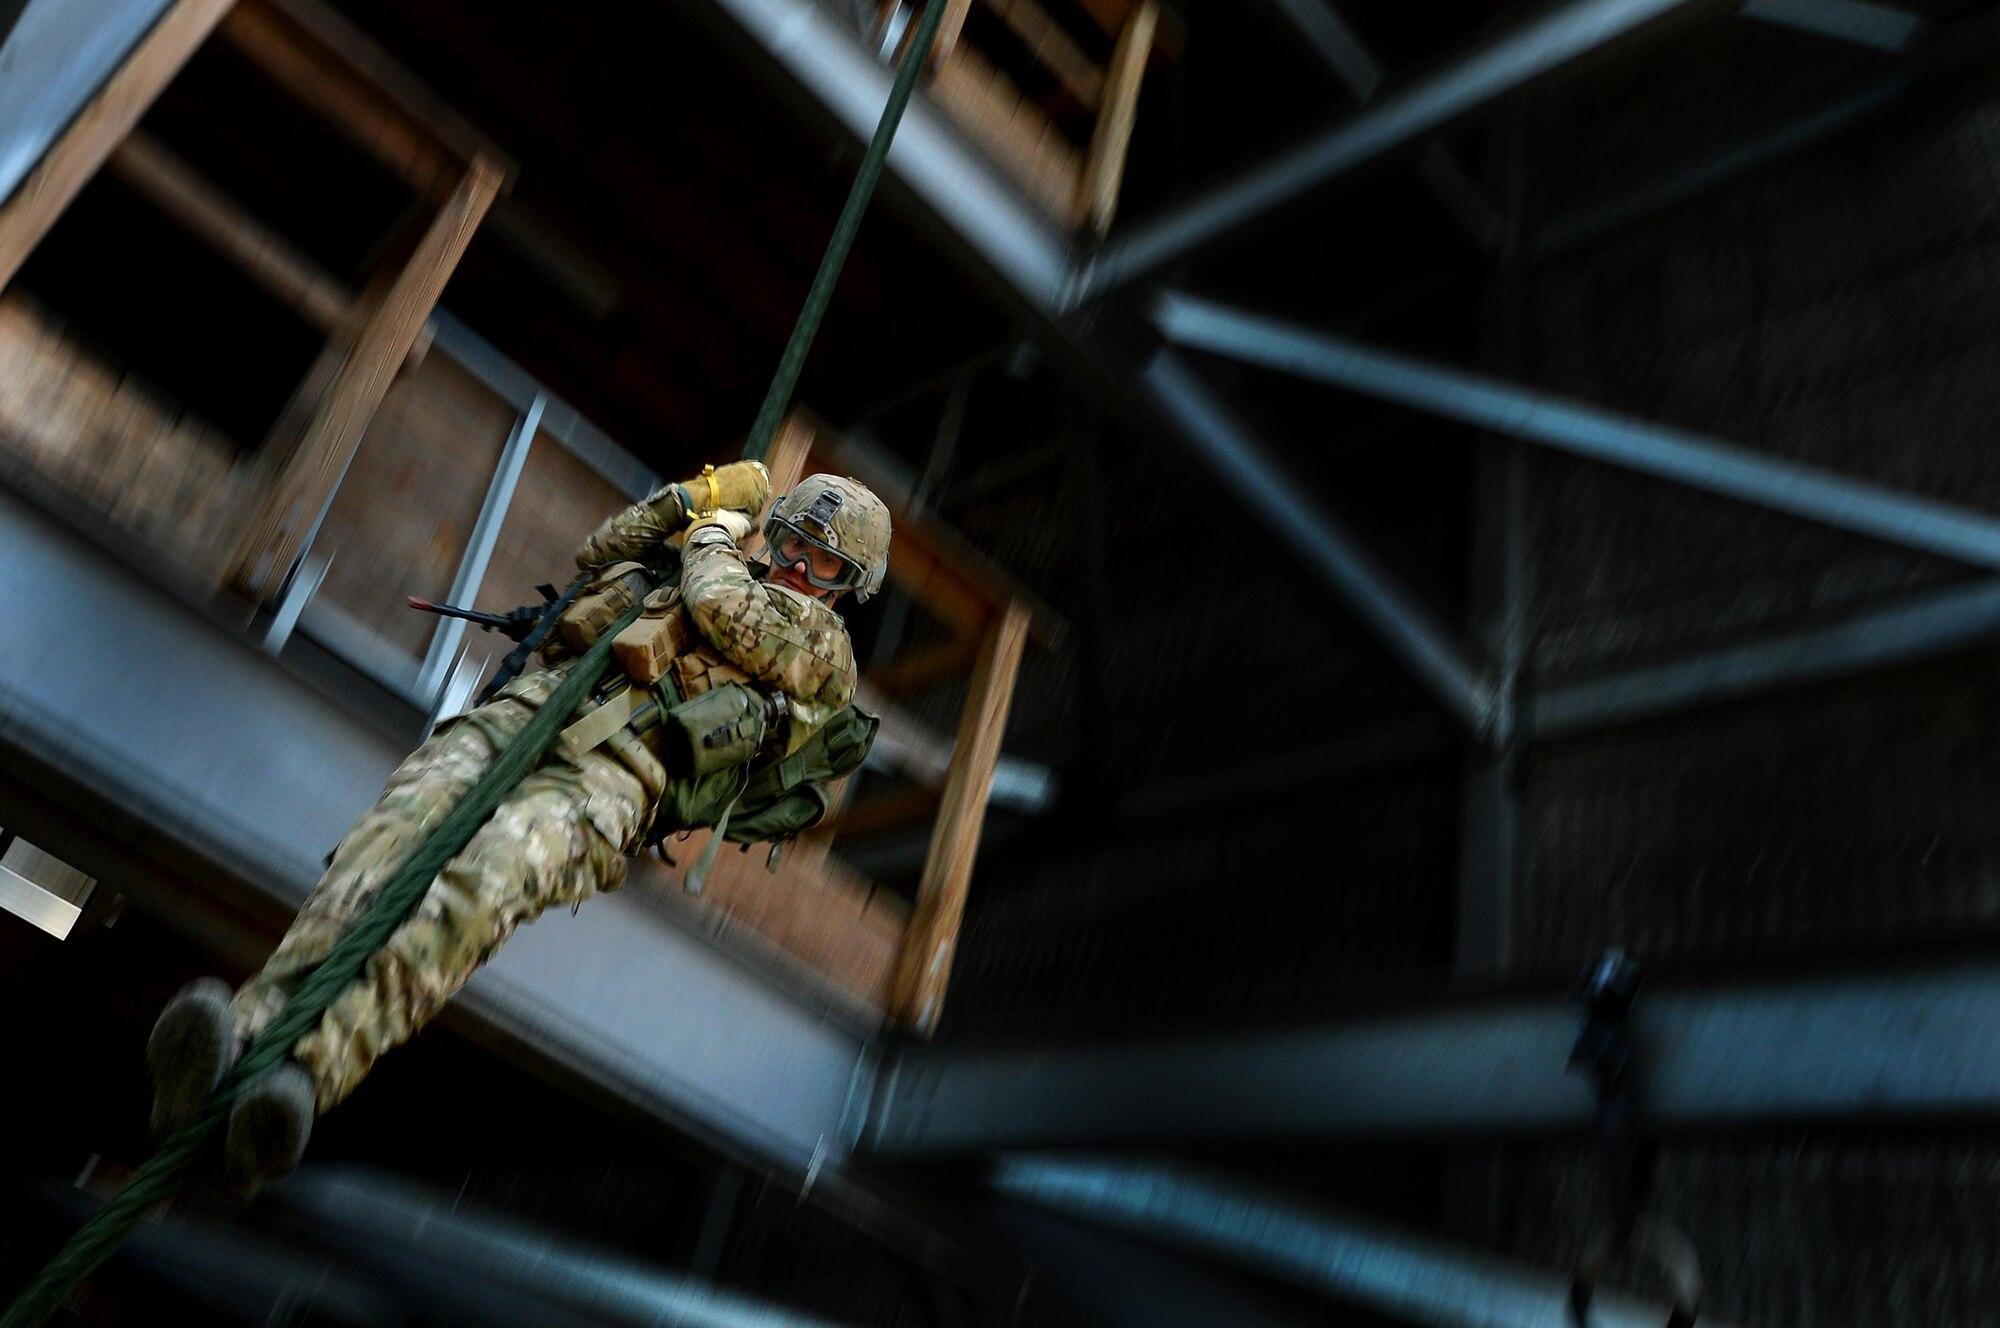 A U.S. Air Force Combat Control trainee assigned to Operating Location C, 342nd Training Squadron, hones his tactical skills while fast-roping from a training tower, Feb. 13, 2015 at Pope Army Airfield, North Carolina. The students begin with tower training to learn the skillset and build their confidence before fast-roping from helicopters. (U.S. Air Force photo by Staff Sgt. Kenny Holston) 